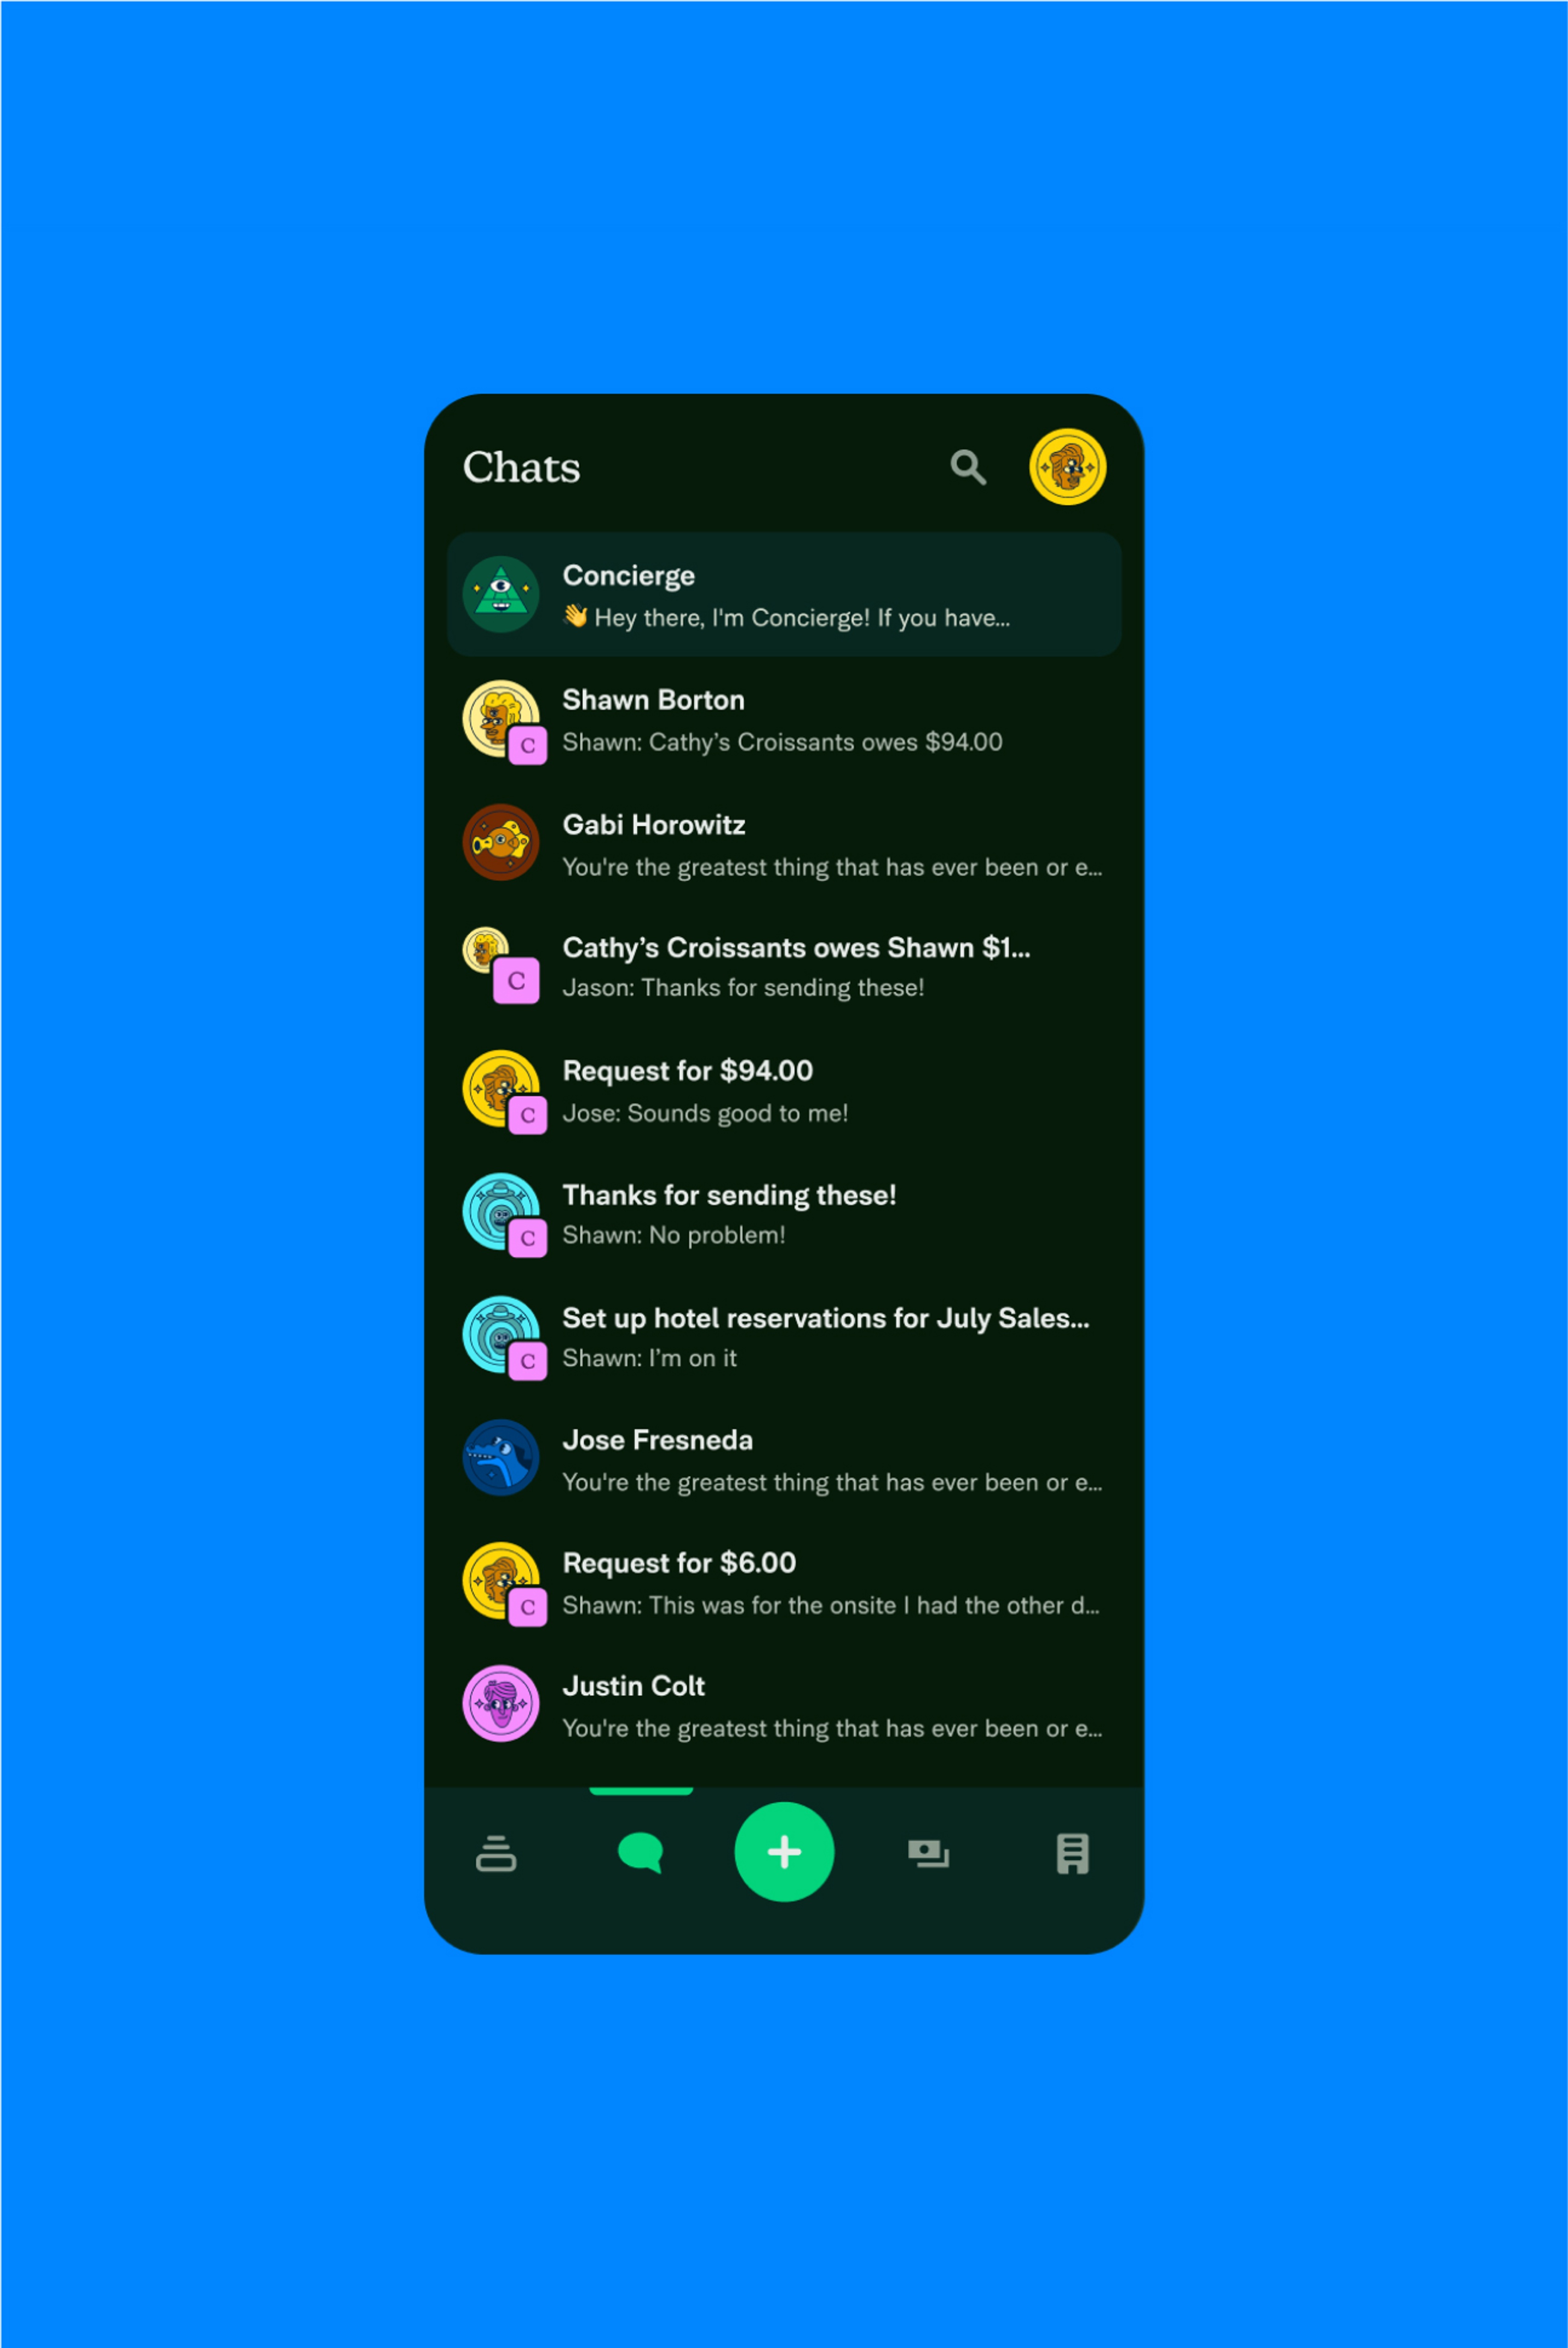 A screenshot of the Expensify app showing a list of chats